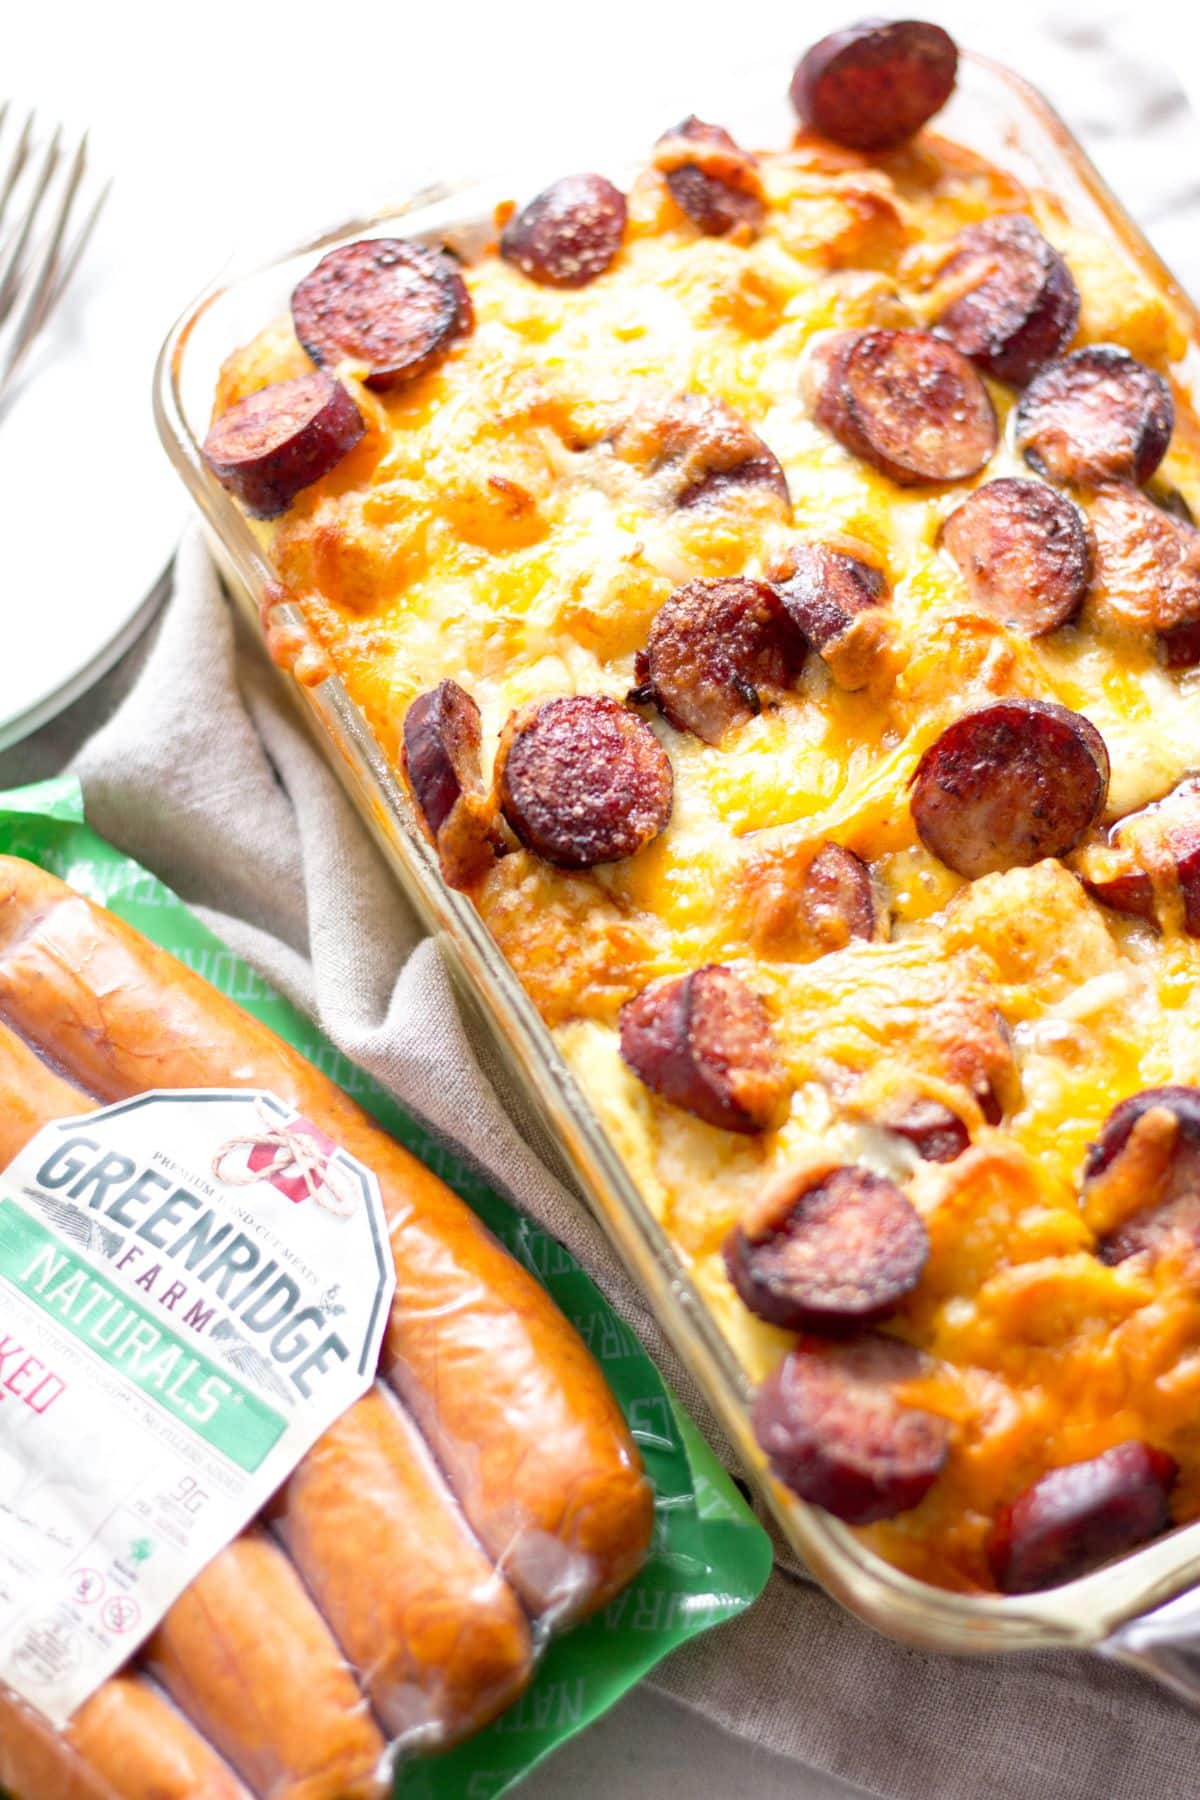 Flavorful andouille sausage breakfast in a glass casserole.